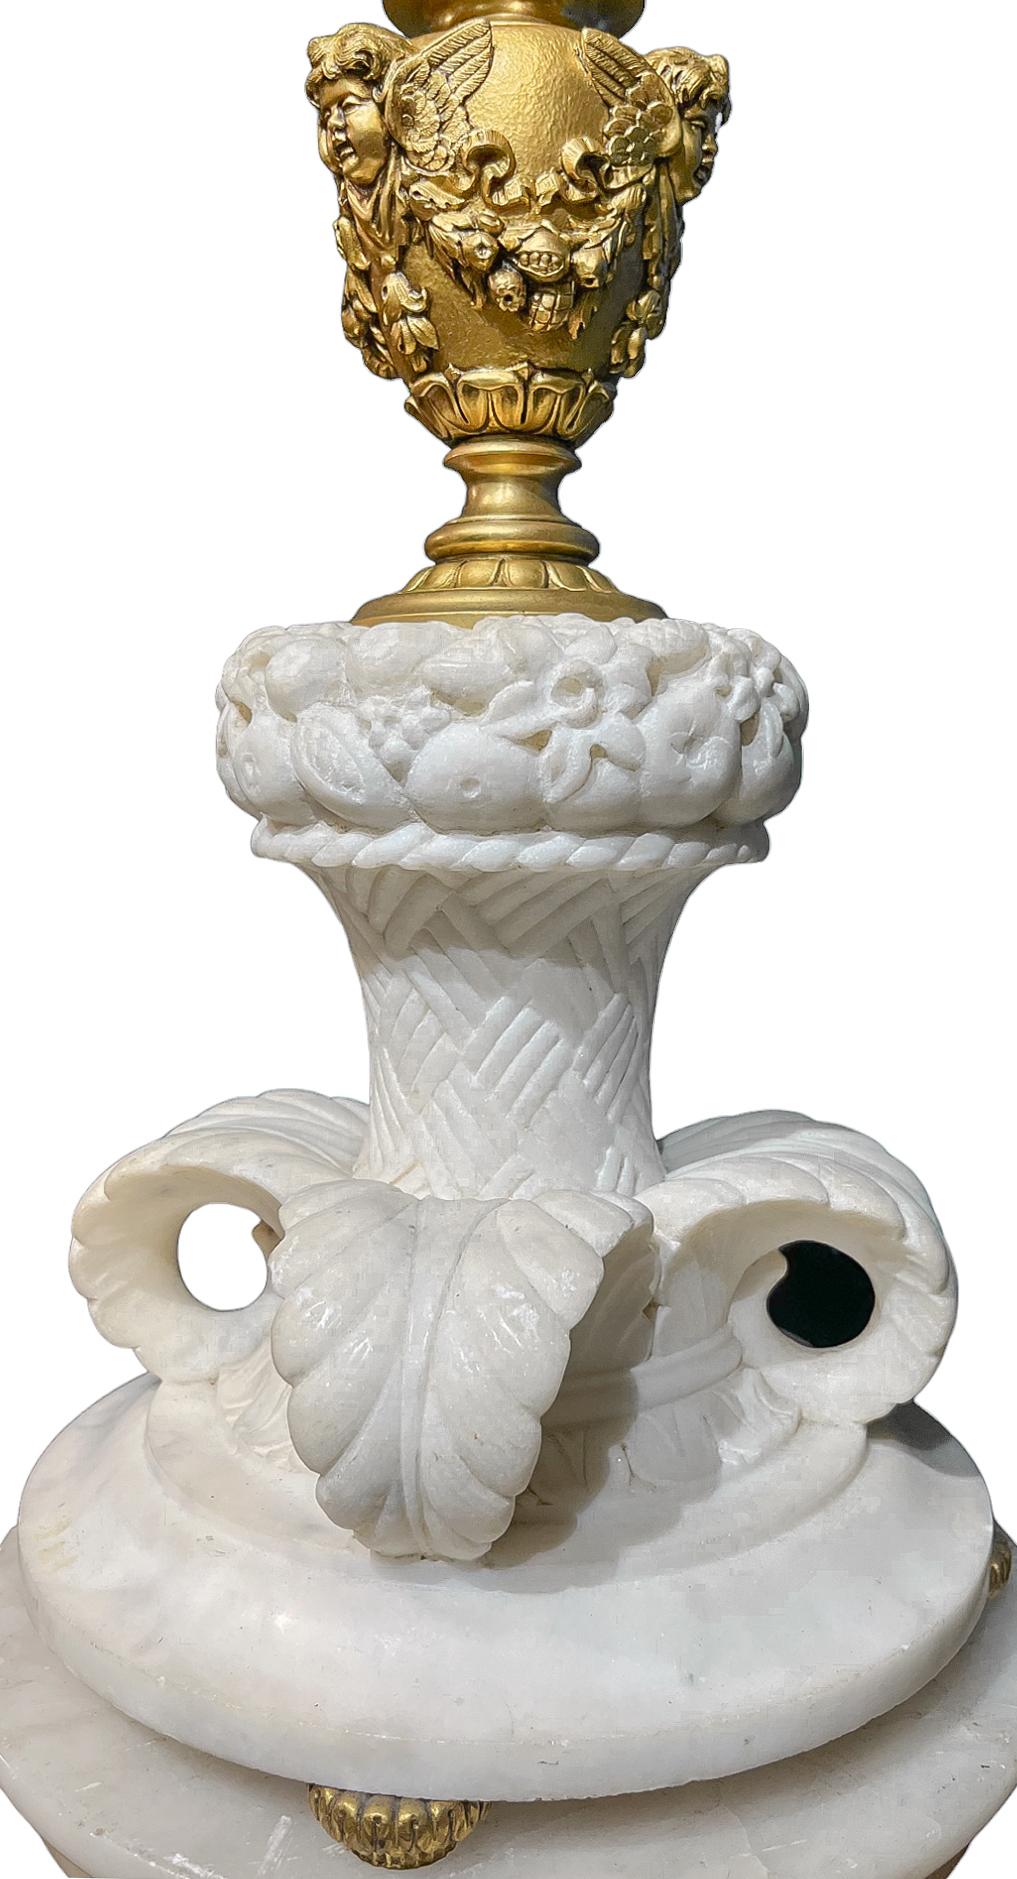  Fine Caldwell Carved Marble & Bronze Lamp with Gilded Cherub heads and a carved marble base raised on bronze bun feet. 

Edward F. Caldwell & Co., of New York City, was one of the premier designers and manufacturers of electric light fixtures and